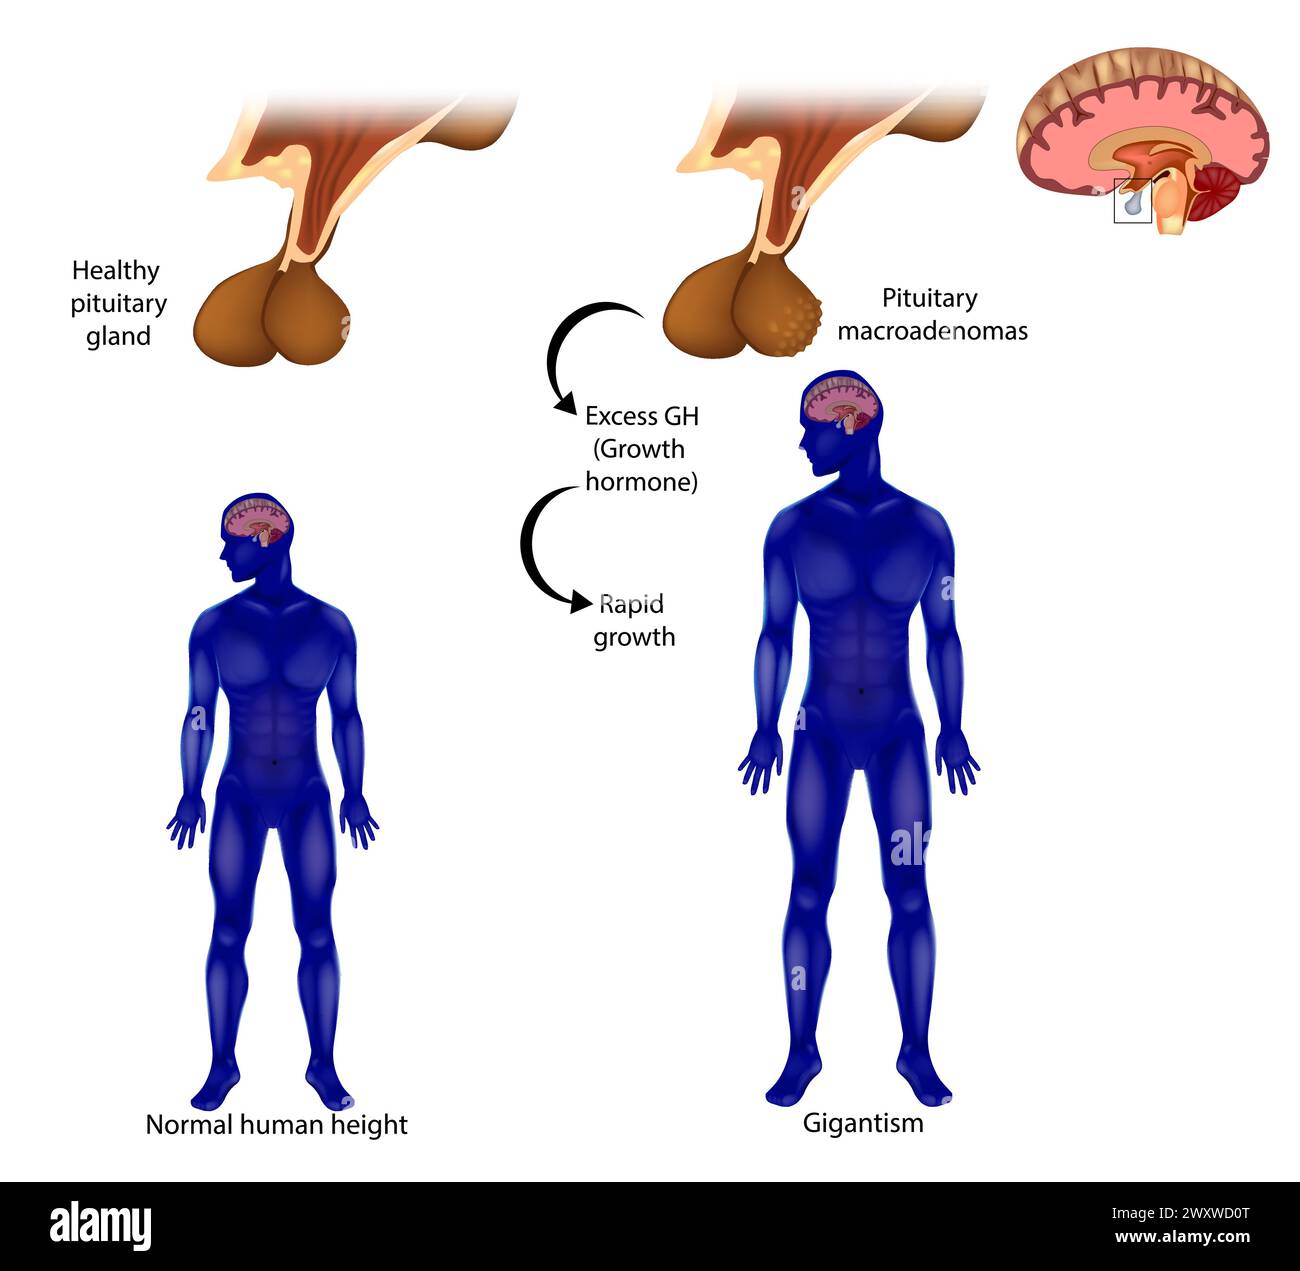 Gigantism also known as giantism. Adenoma, a tumor of the pituitary gland. Excess GH Stock Vector